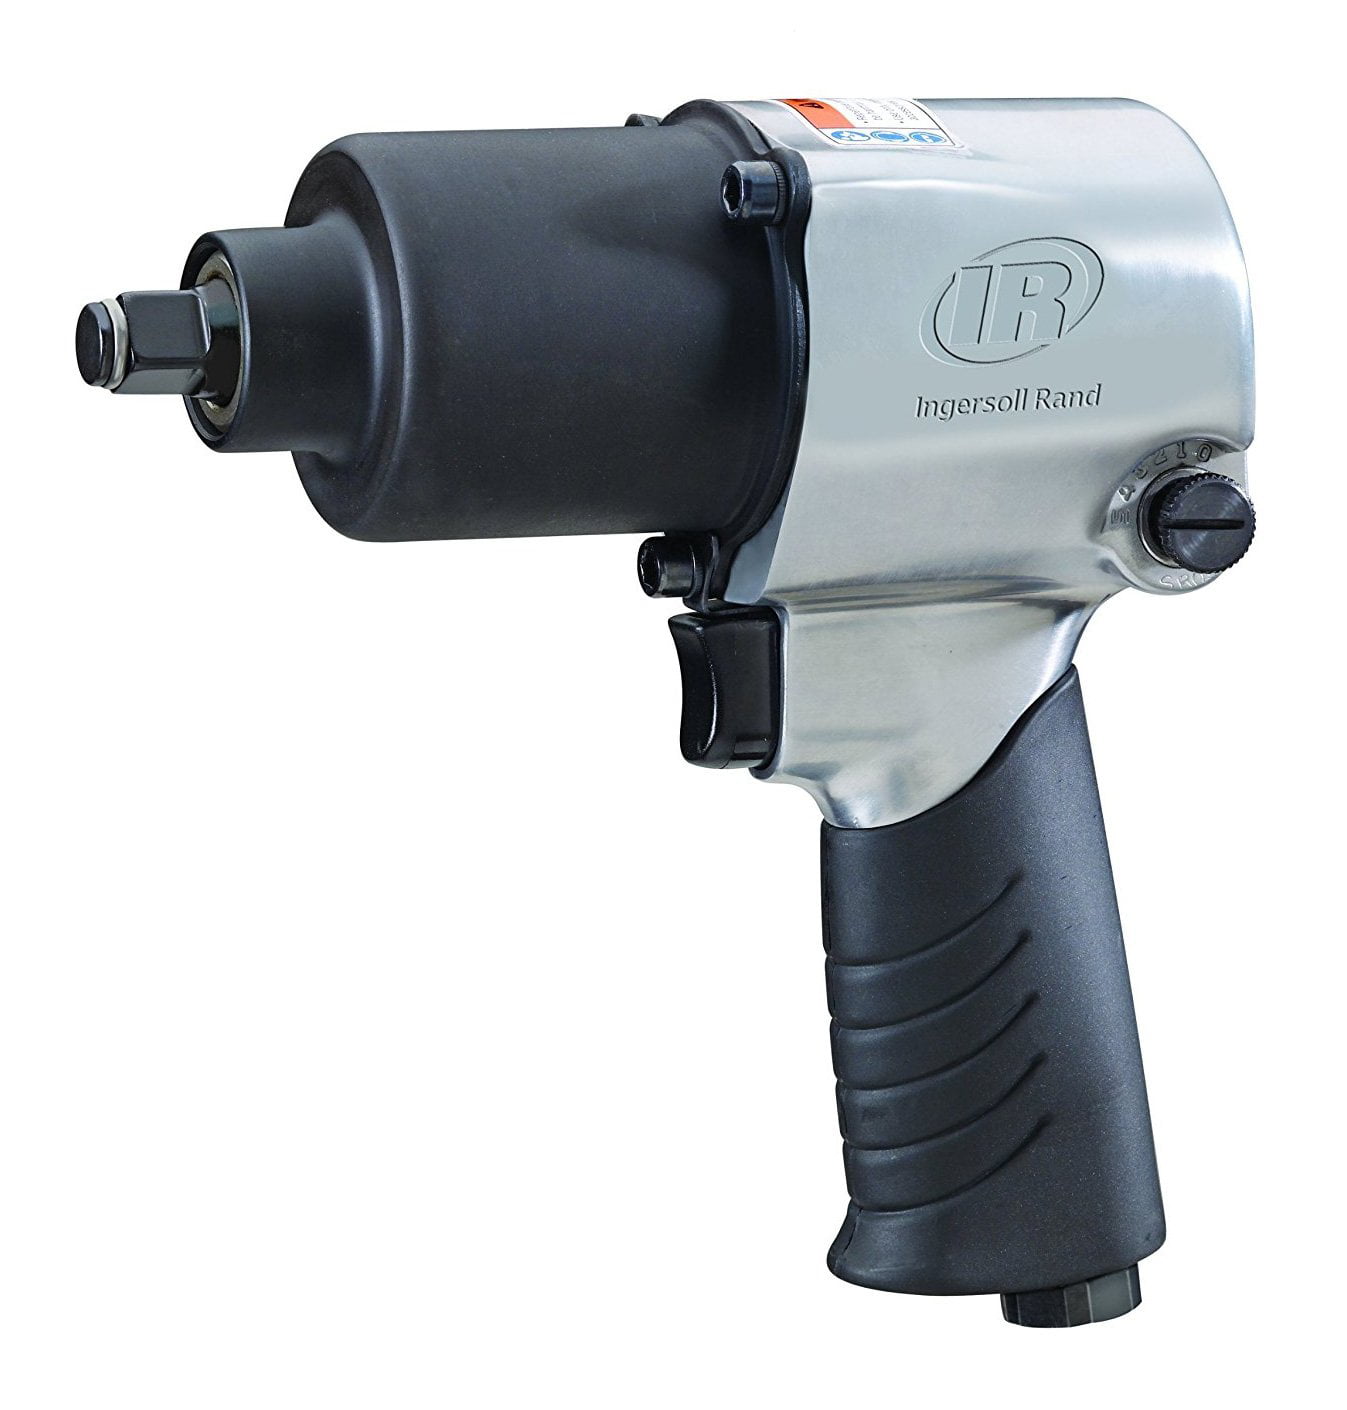 INGERSOLL RAND 231C Air Impact Wrench,1/2 In Dr.,8000 rpm 